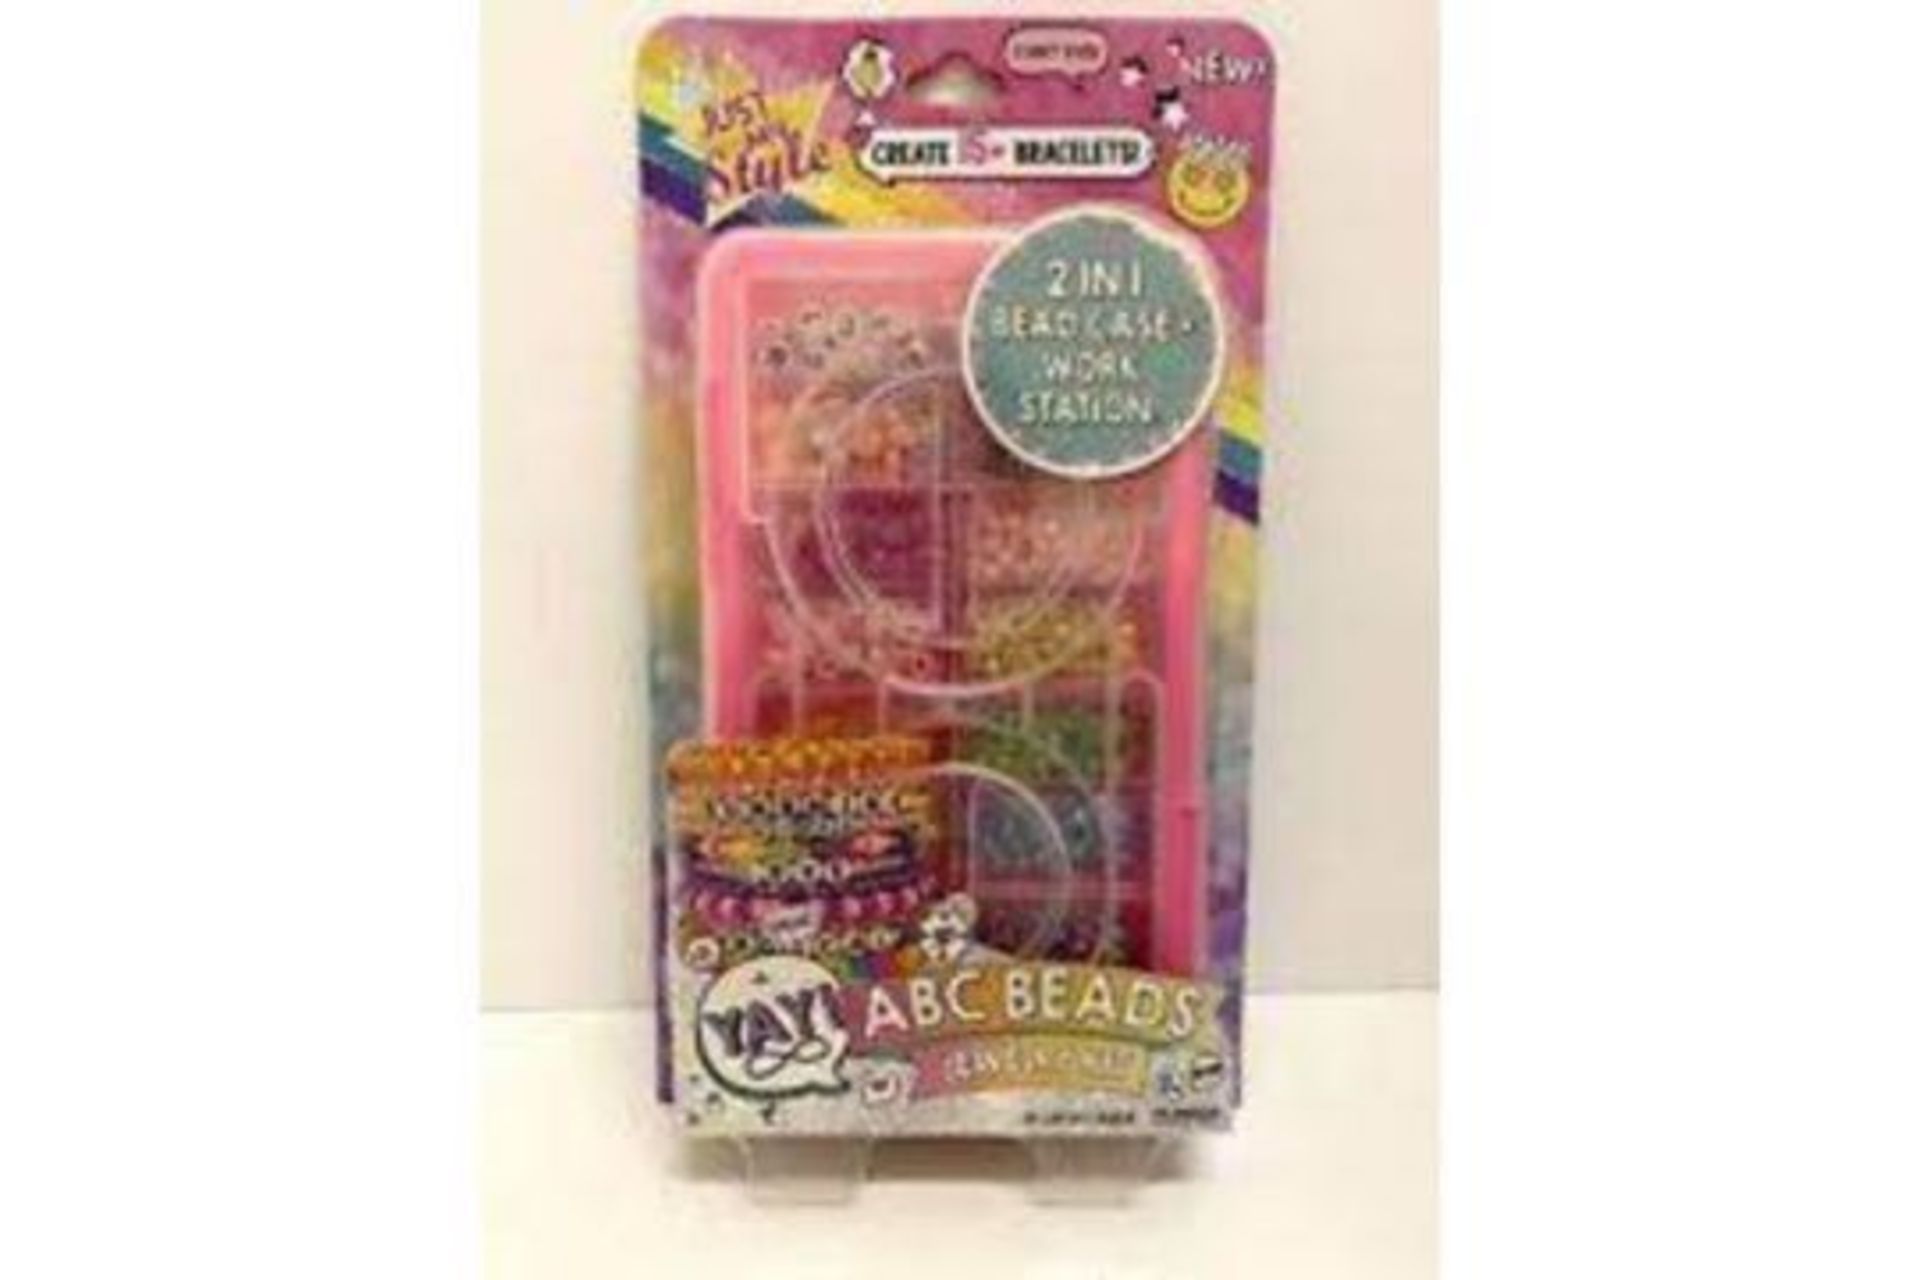 36 X NEW PACKAGED JUST MY STYLE 2 IN 1 BEAD CASE WORK STATION. ABC BEADS JEWELRY KIT. (ROW15RACK)